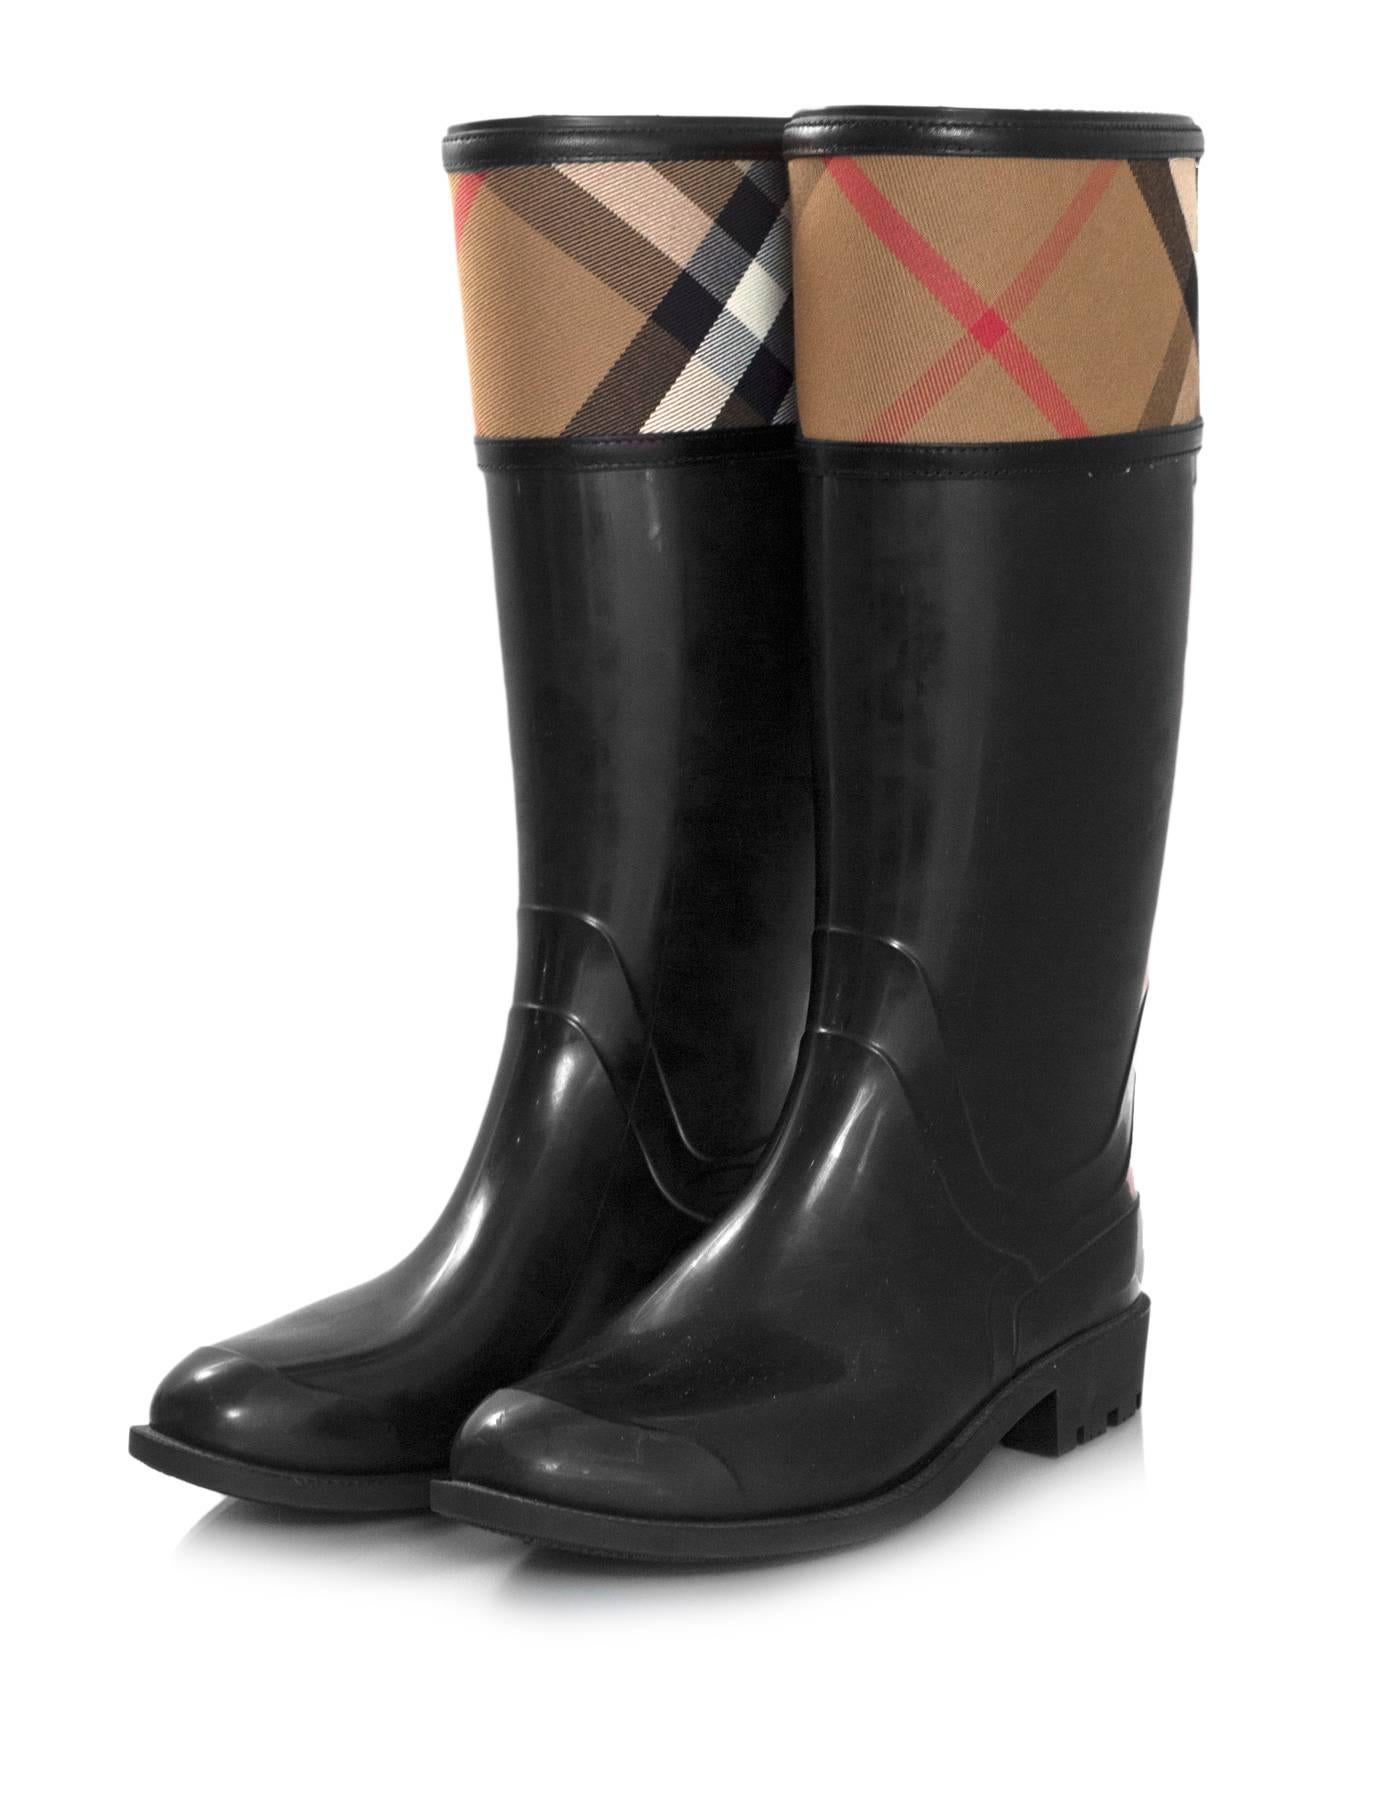 Burberry Black Rubber Crosshill Housecheck Rain Boots Sz 39

Made In: Italy
Color: Black, beige
Materials: Canvas and rubber
Closure/Opening: Slide on
Sole Stamp: Burberry Made in Italy 39
Retail Price: $350 + tax
Overall Condition: Excellent